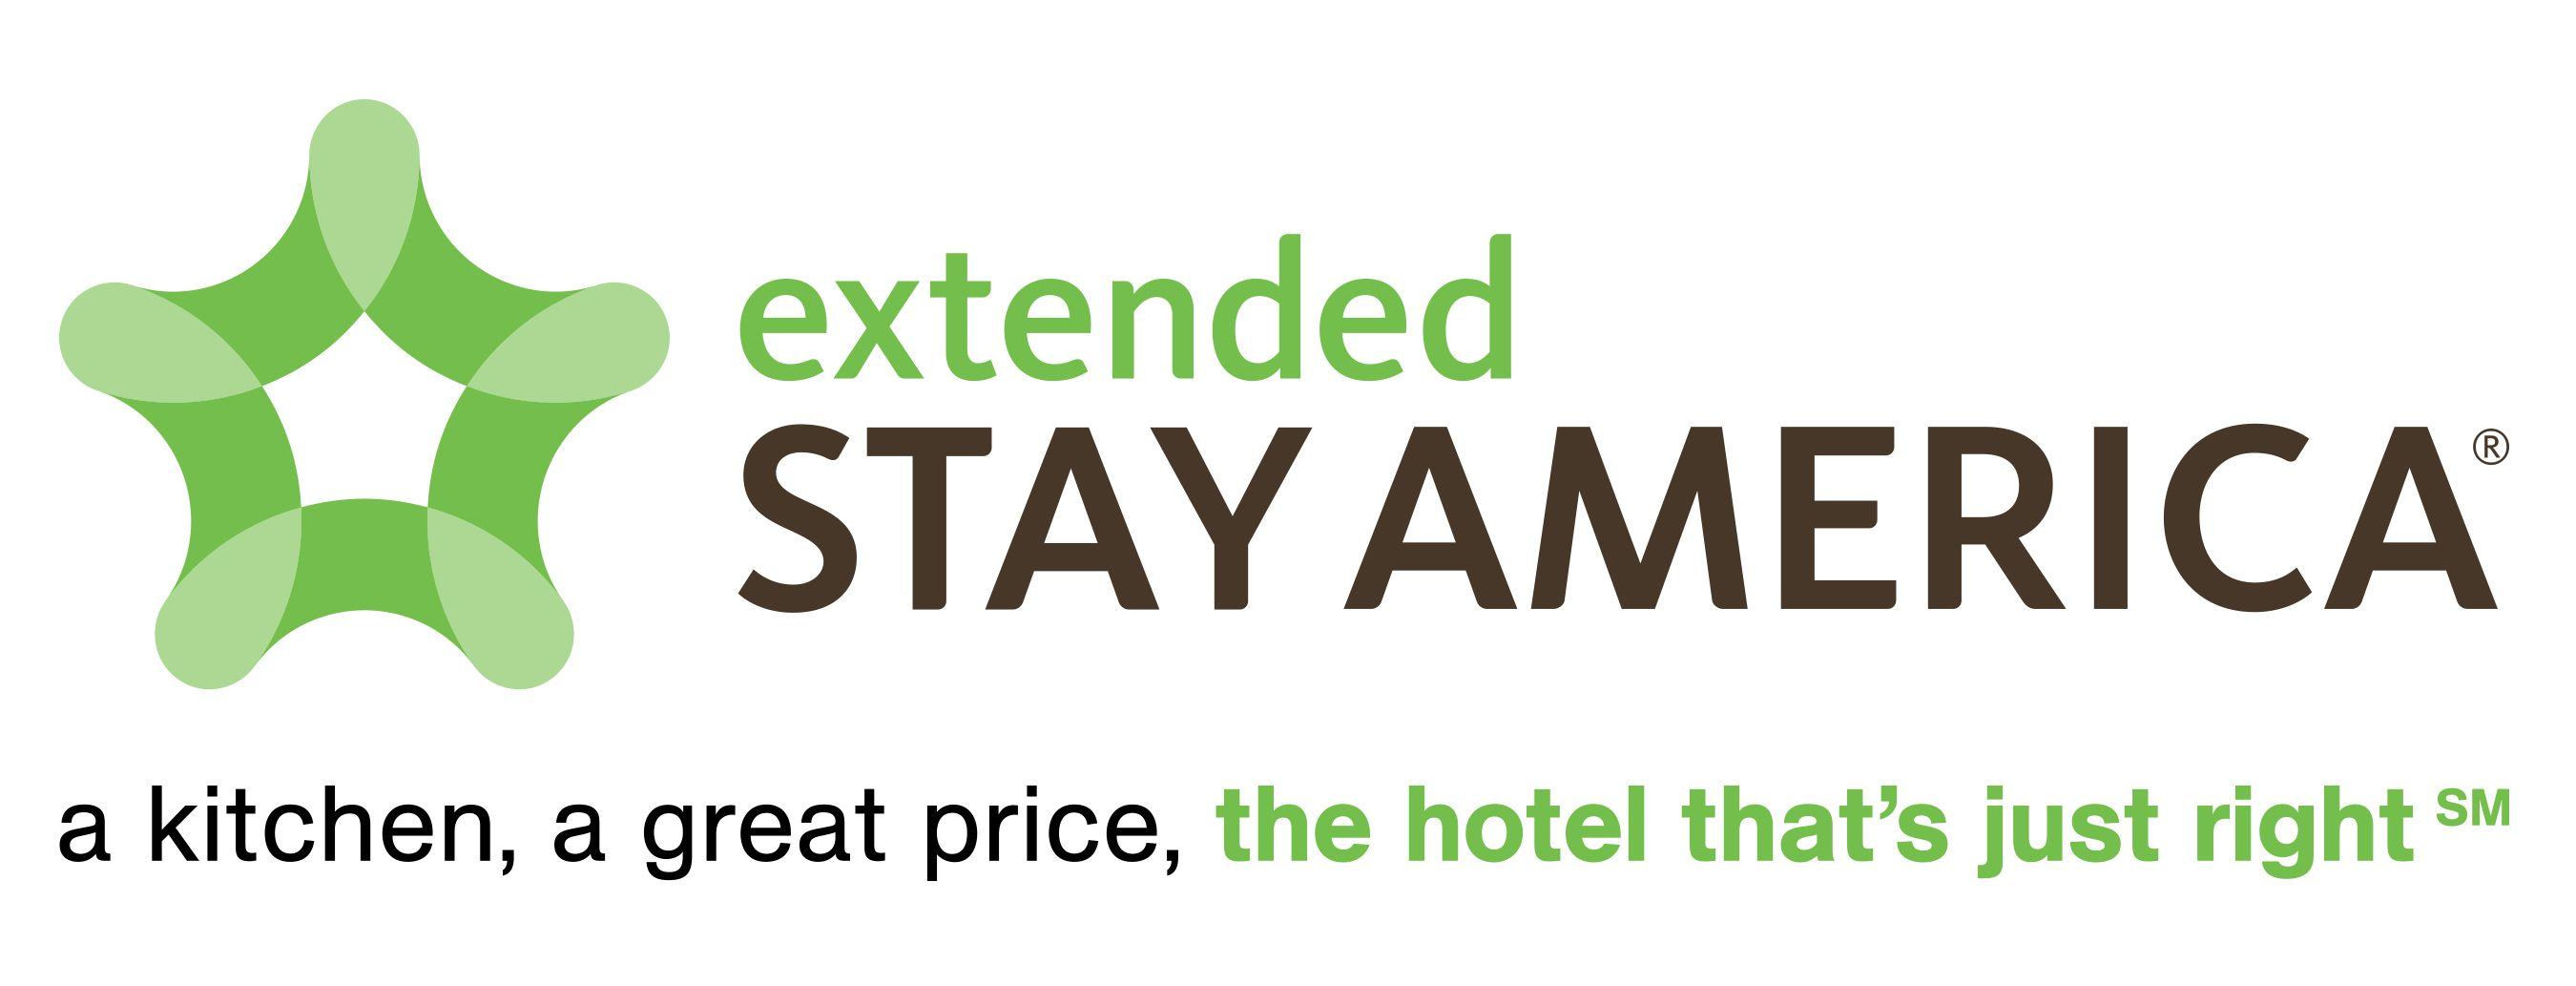 Extended Stay America Logo - Extended Stay America Shows Appreciation To Loyal Customers With